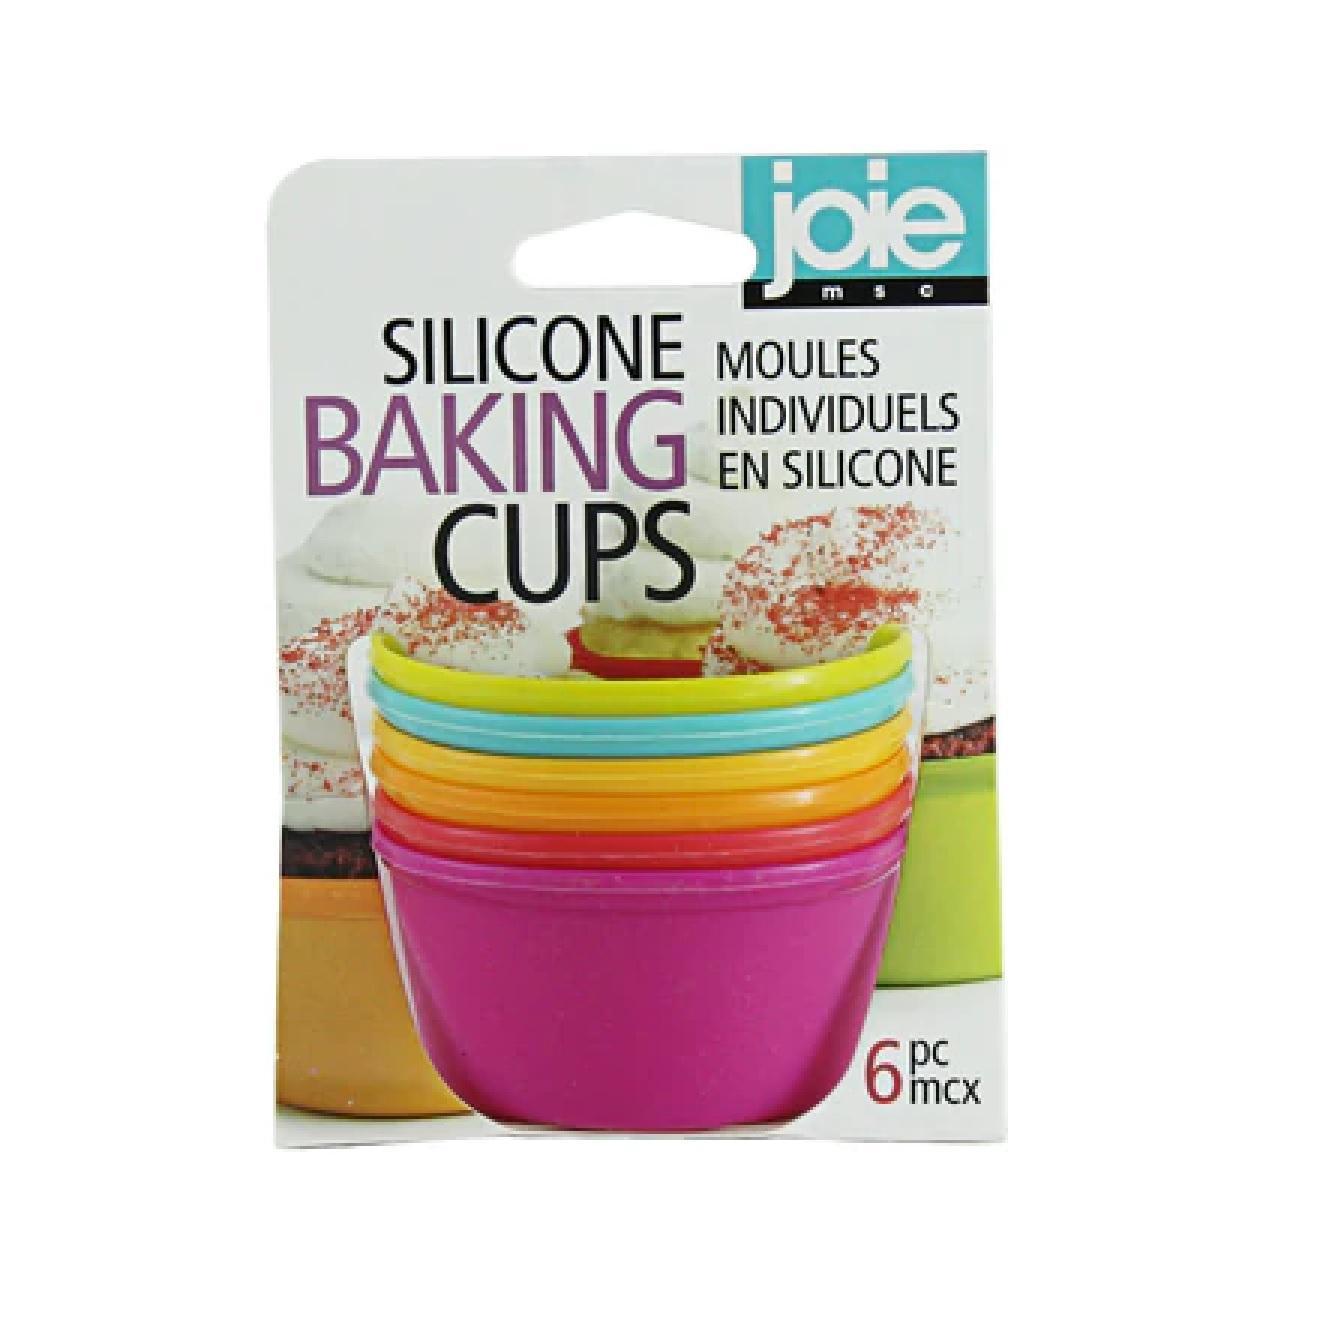 CAKETIME Silicone Baking Cup with Lid CAKETIME